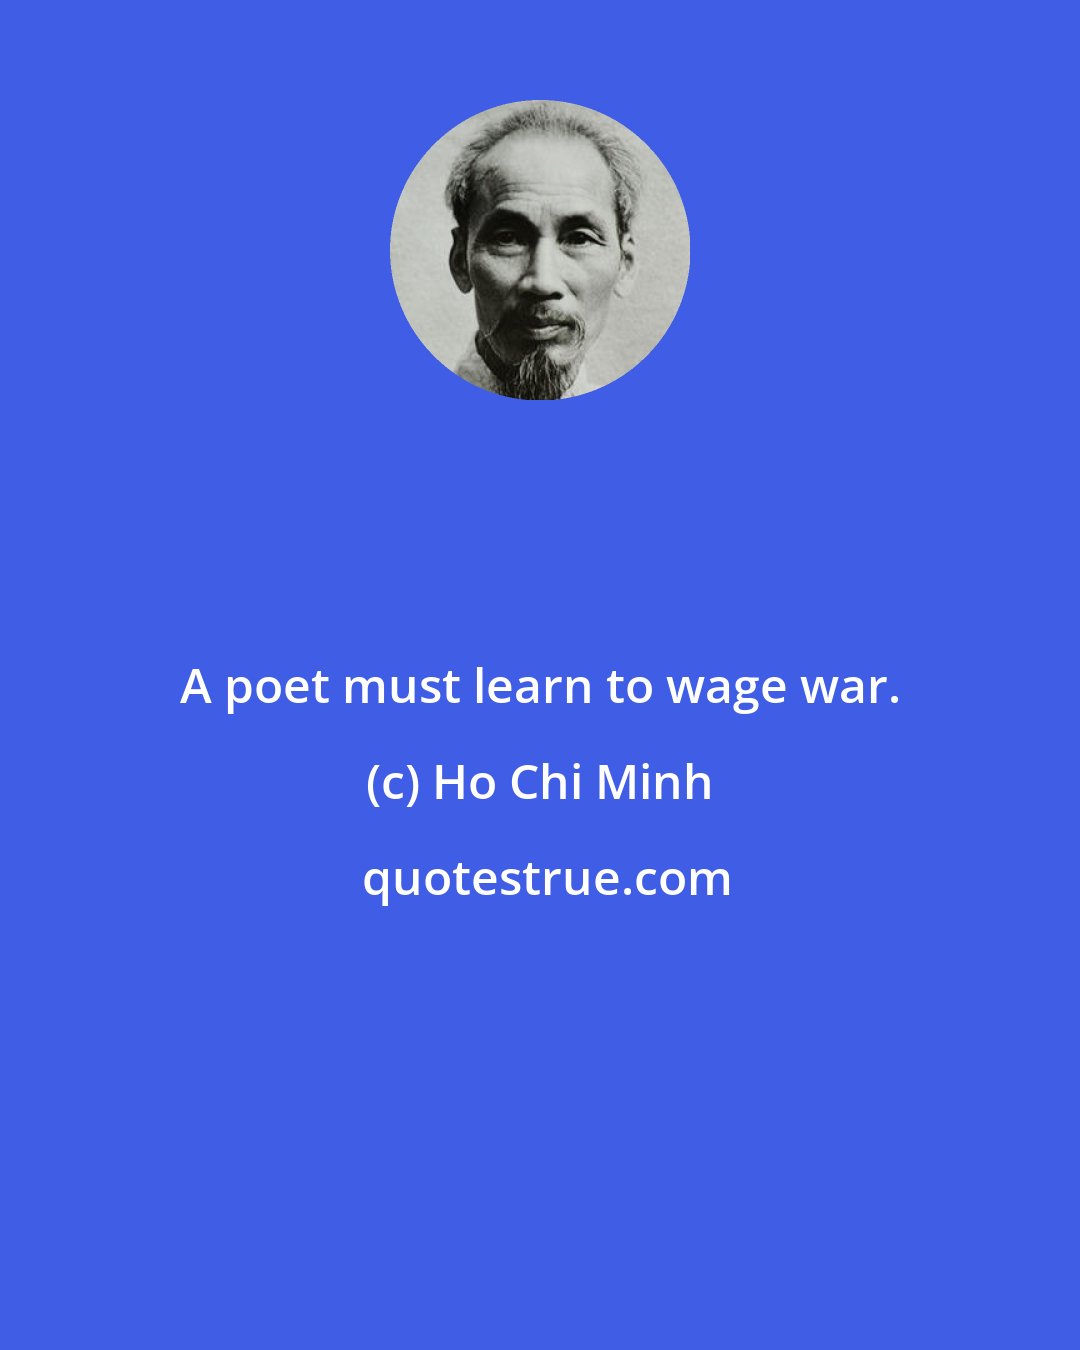 Ho Chi Minh: A poet must learn to wage war.